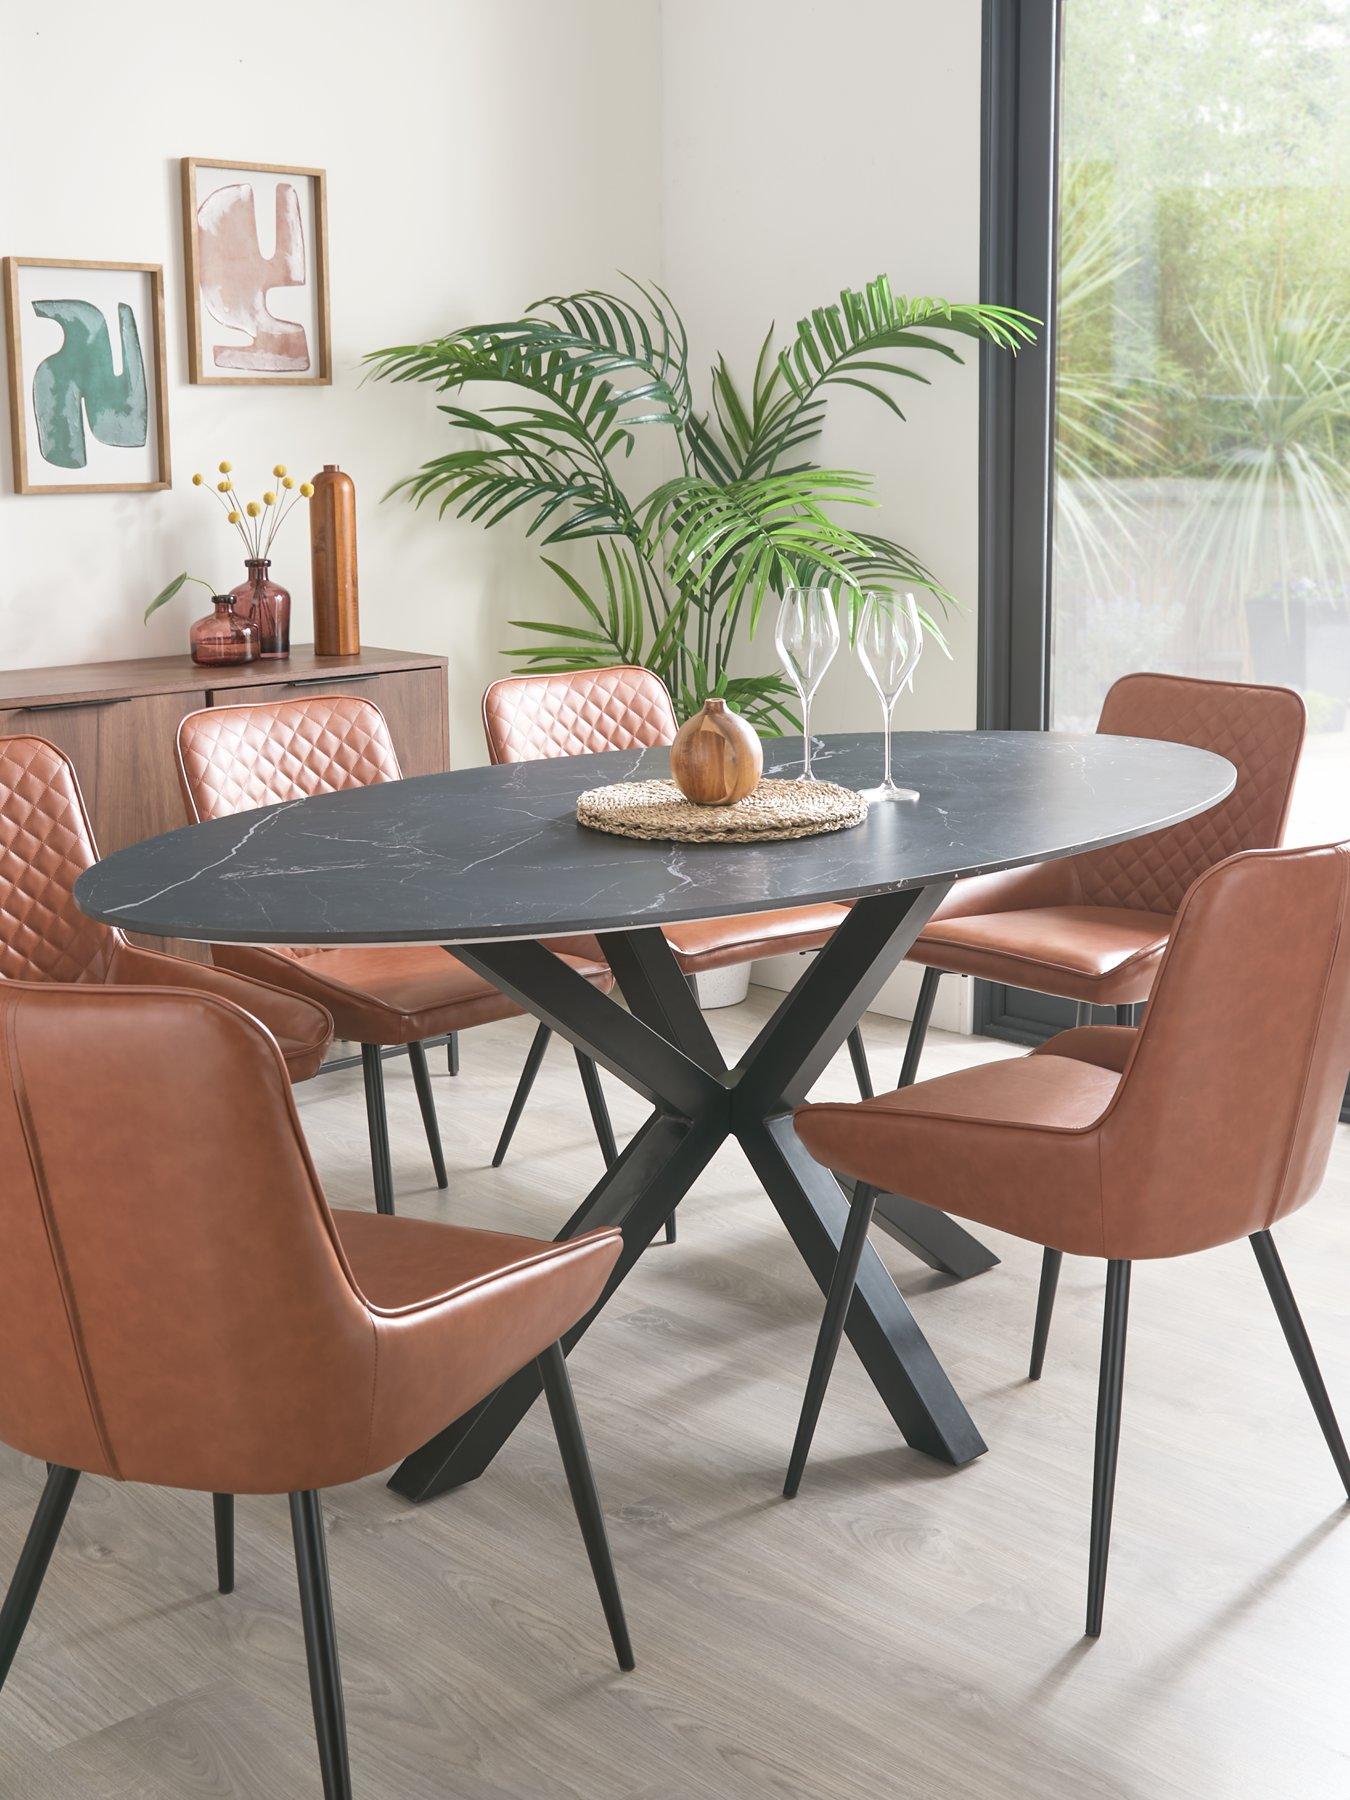 Very Home Sorena Ceramic Top Dining Table With 6 Tan Chairs